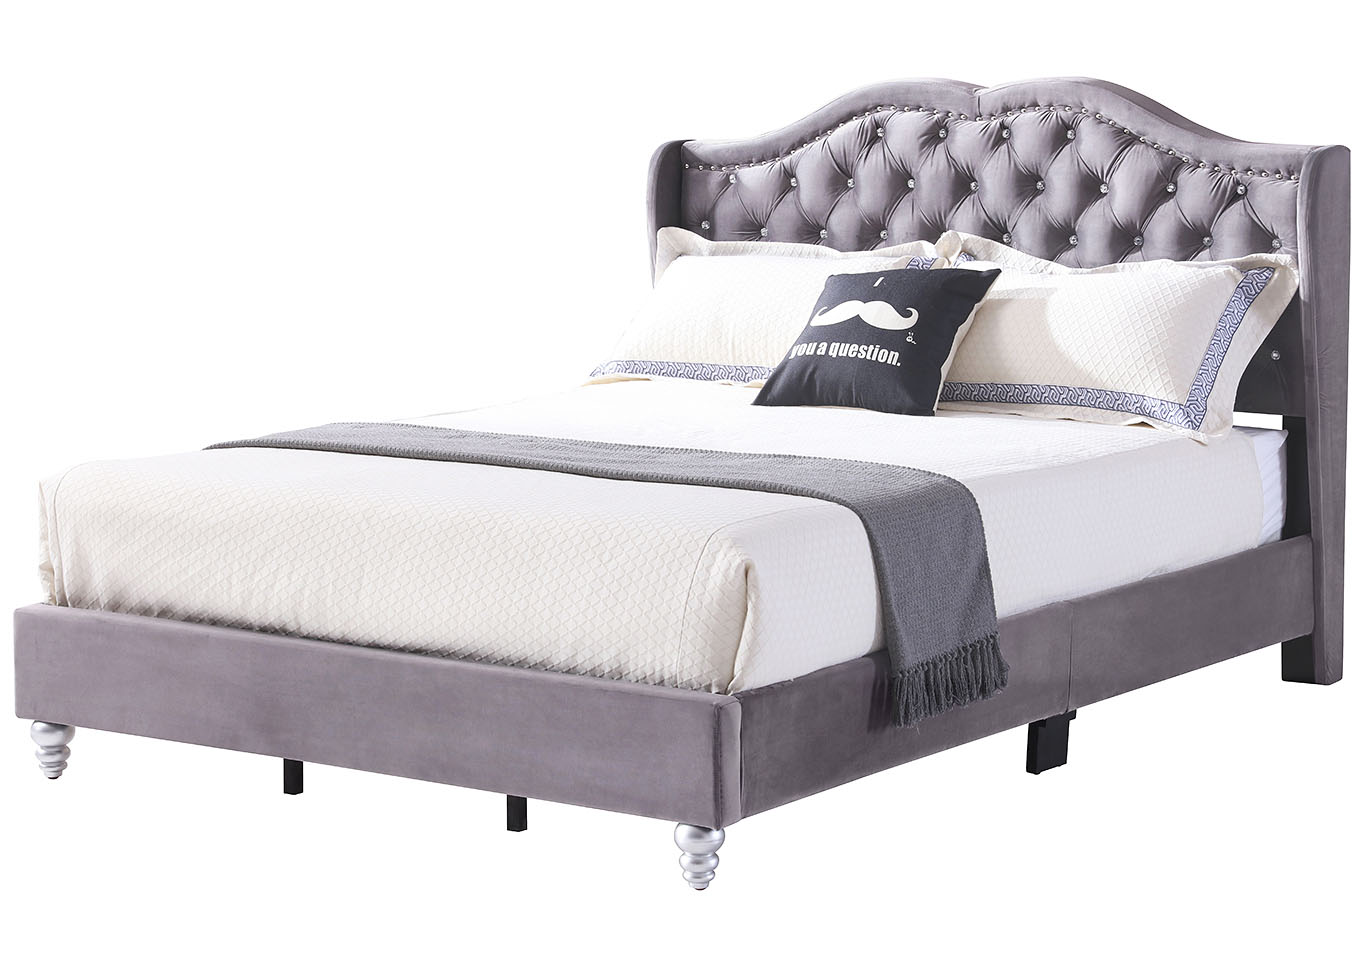 Gray Micro Suede Upholstered Queen Bed,Glory Furniture